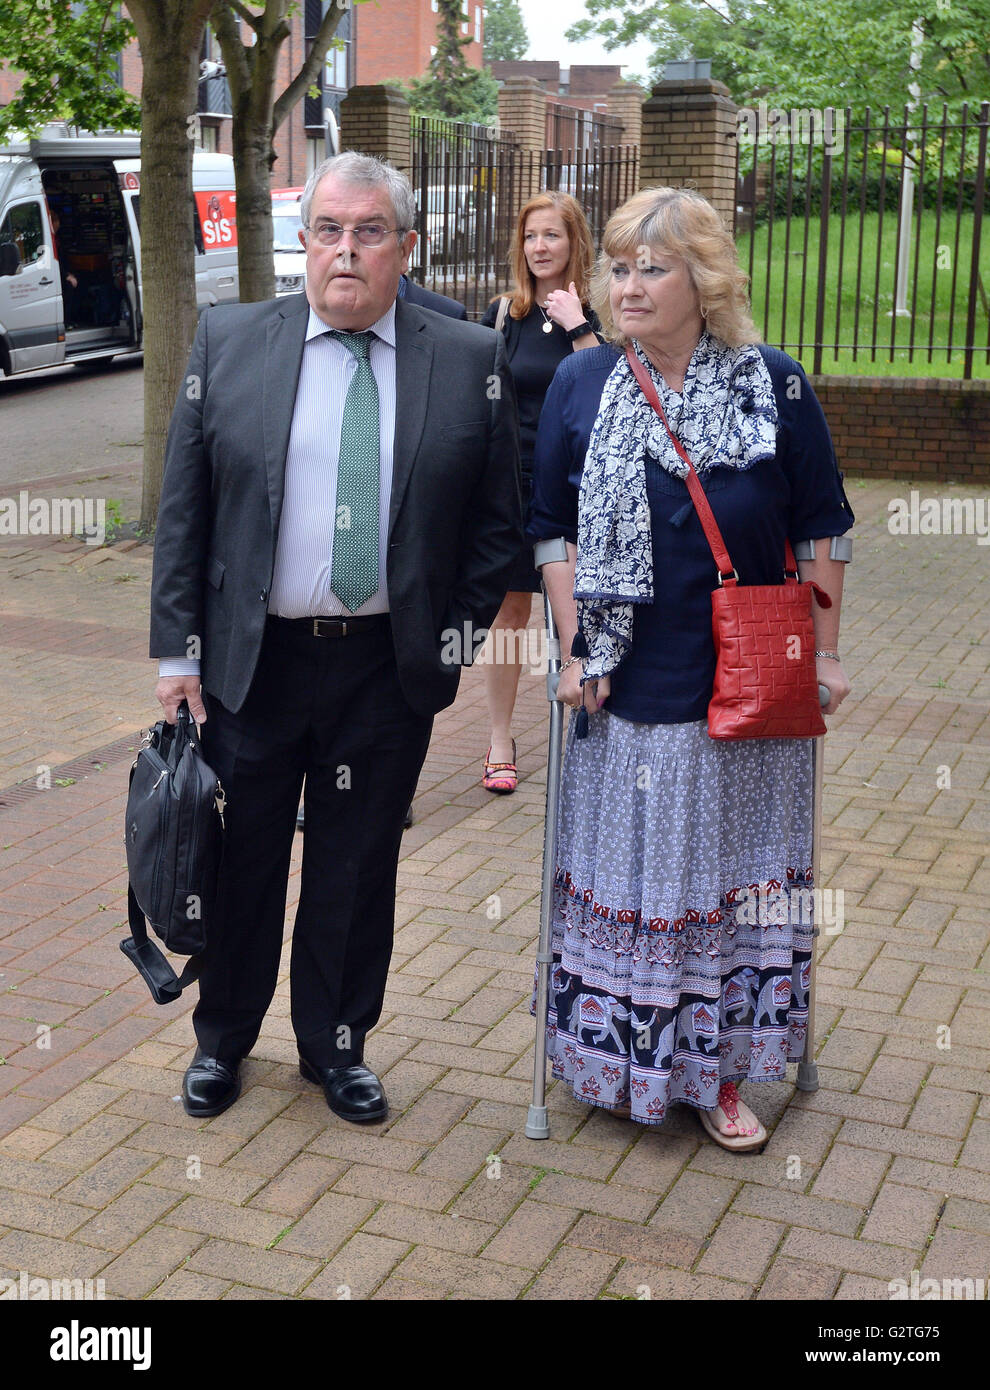 Des and Doreen James, parents of Private Cheryl James, arrive at Woking Coroner's Court in Surrey, where a coroner will deliver the long-awaited ruling into how she died at Deepcut Army barracks. Stock Photo